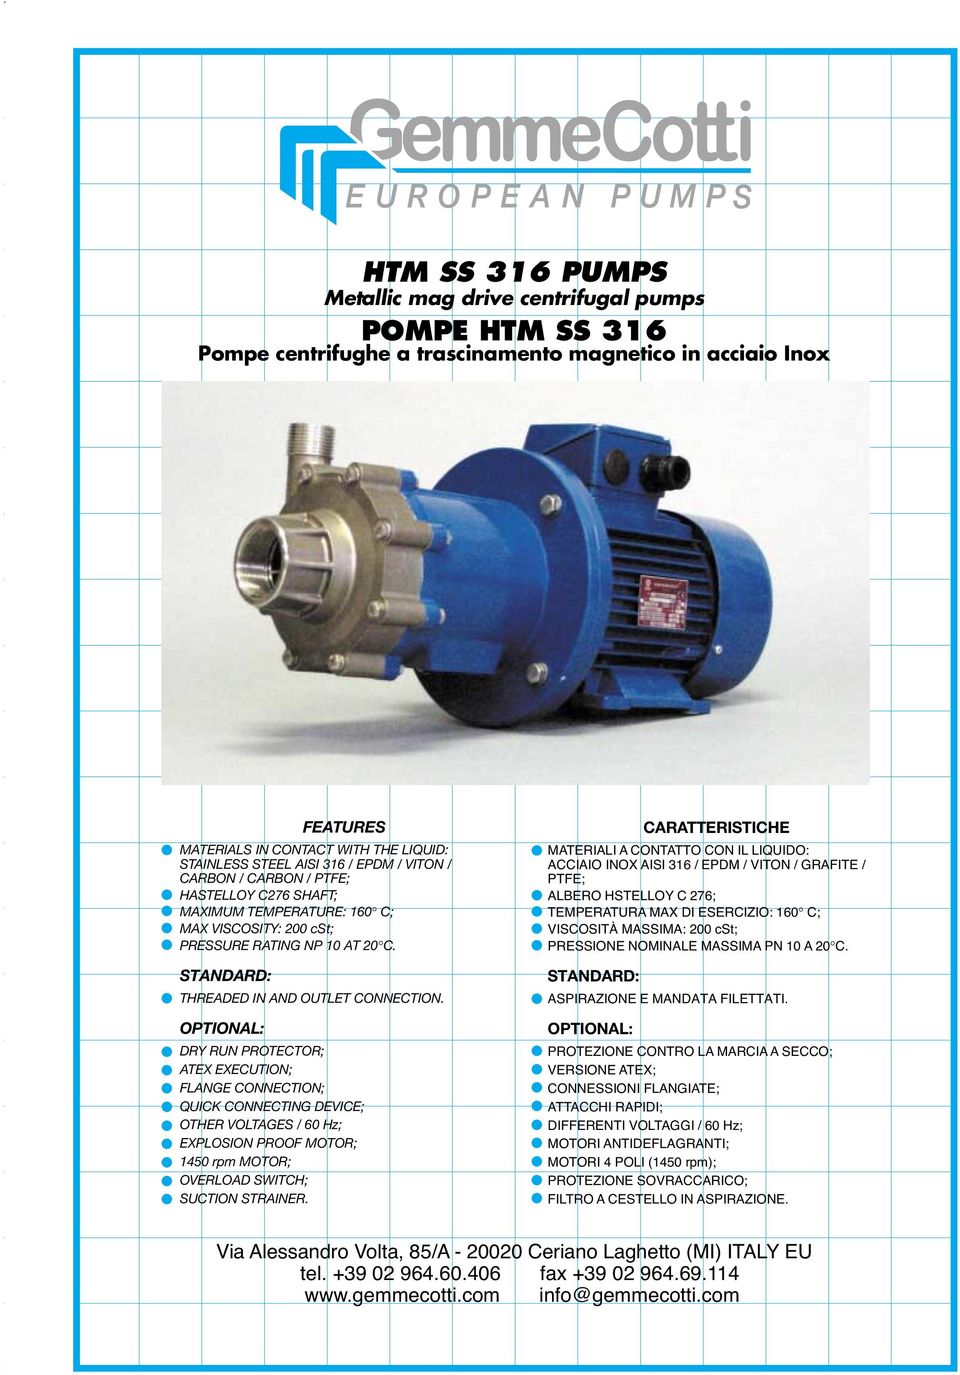 OPTIONAL: DRY RUN PROTECTOR; ATEX EXECUTION; CONNECTION; QUICK CONNECTING DEVICE; OTHER VOLTAGES / 60 Hz; EXPLOSION PROOF MOTOR; 1450 rpm MOTOR; OVERLOAD SWITCH; SUCTION STRAINER.